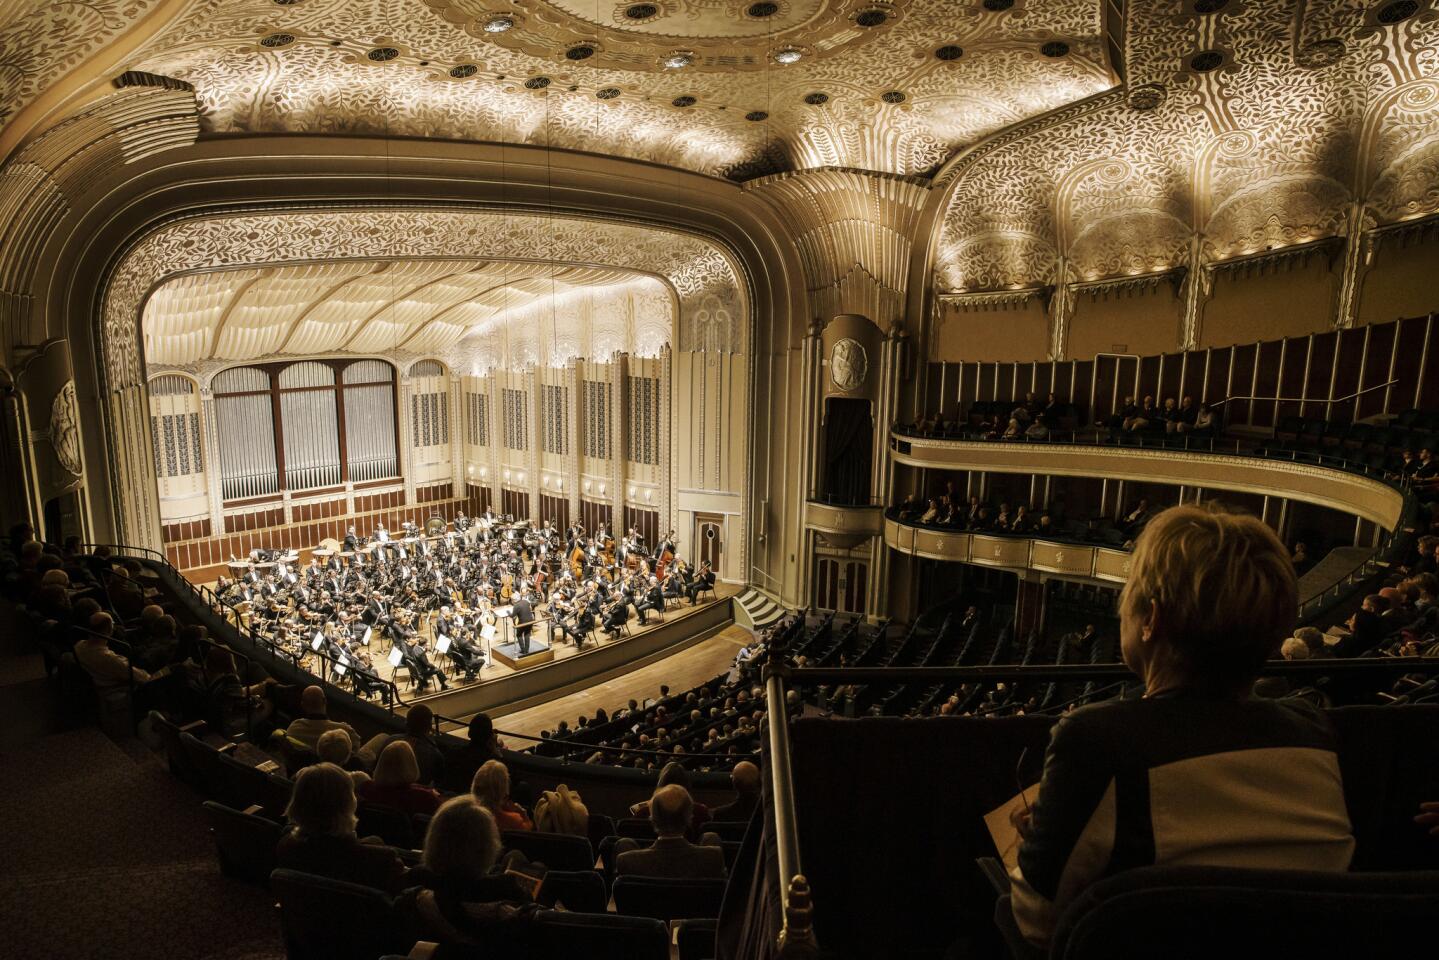 Severance Hall is the home of the world-class Cleveland Orchestra, conducted here by Ingo Metzmacher in an October concert.